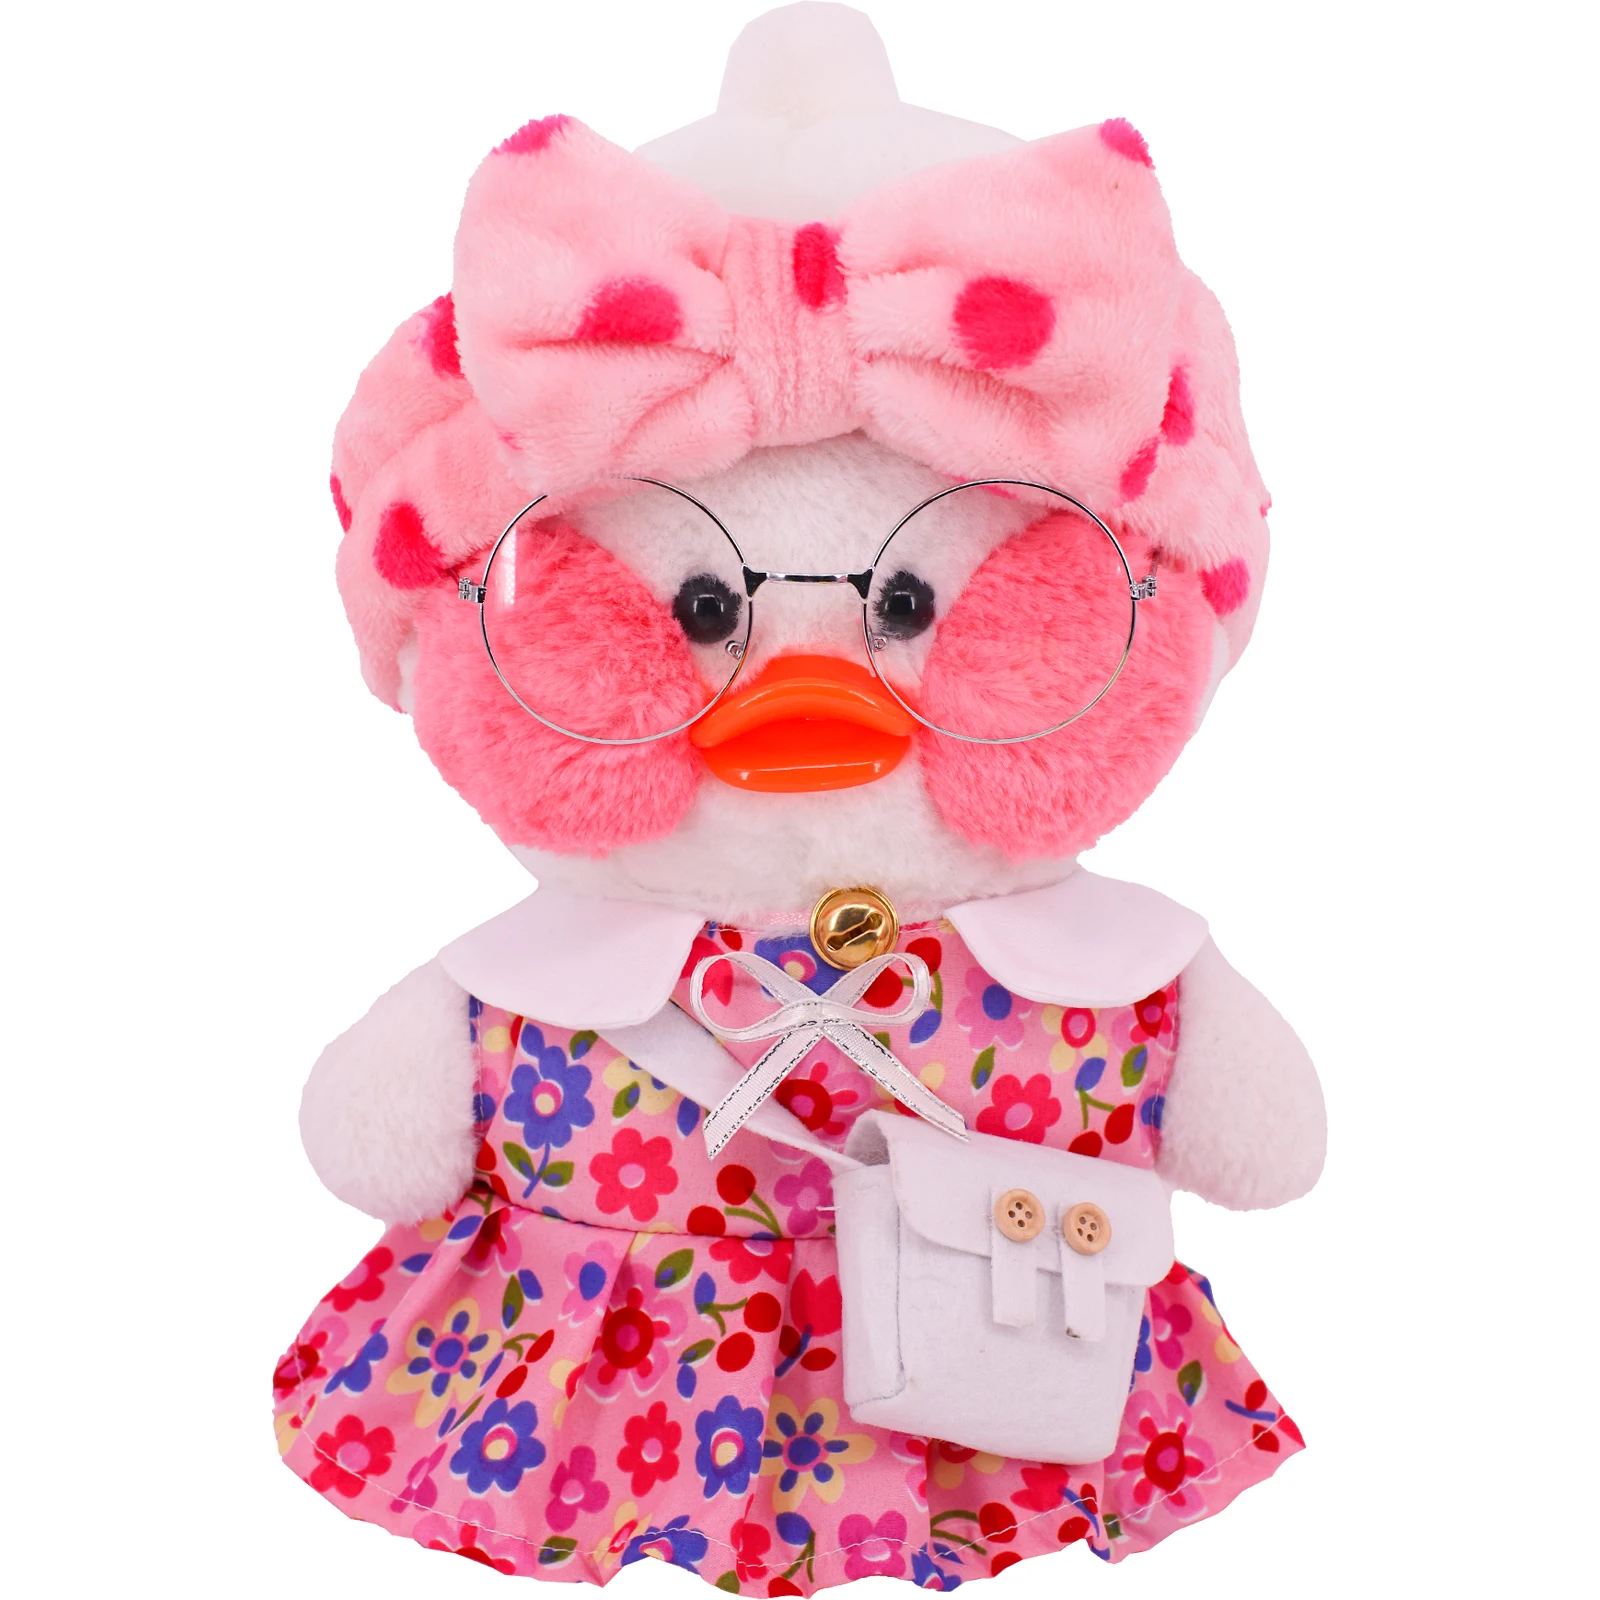 30 Cm Duck Plush Cafe Lalafafan Clothes Original Design Duck Clothes Dress Sweater for 20-30cm Plush Animal Doll Girls Toy images - 6